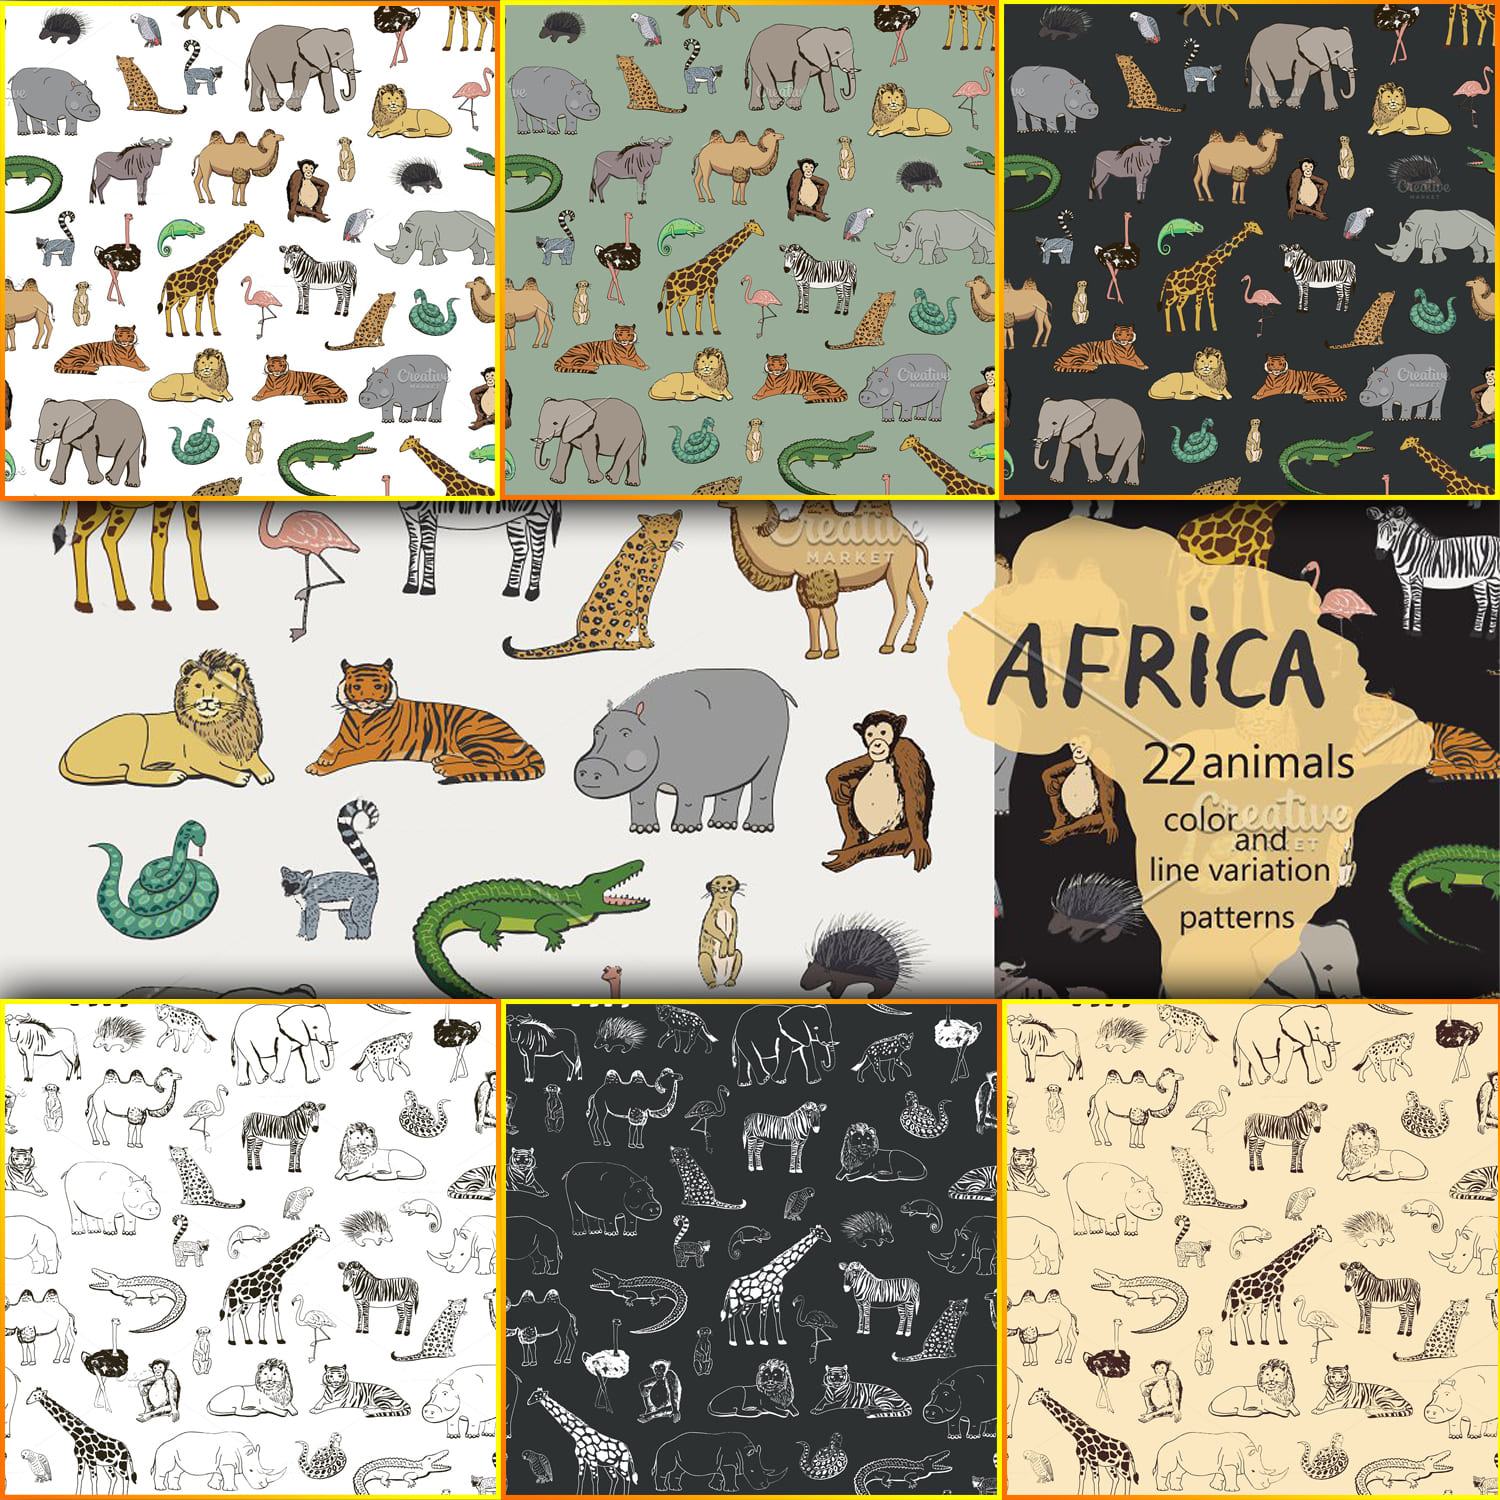 African Animals Cover.